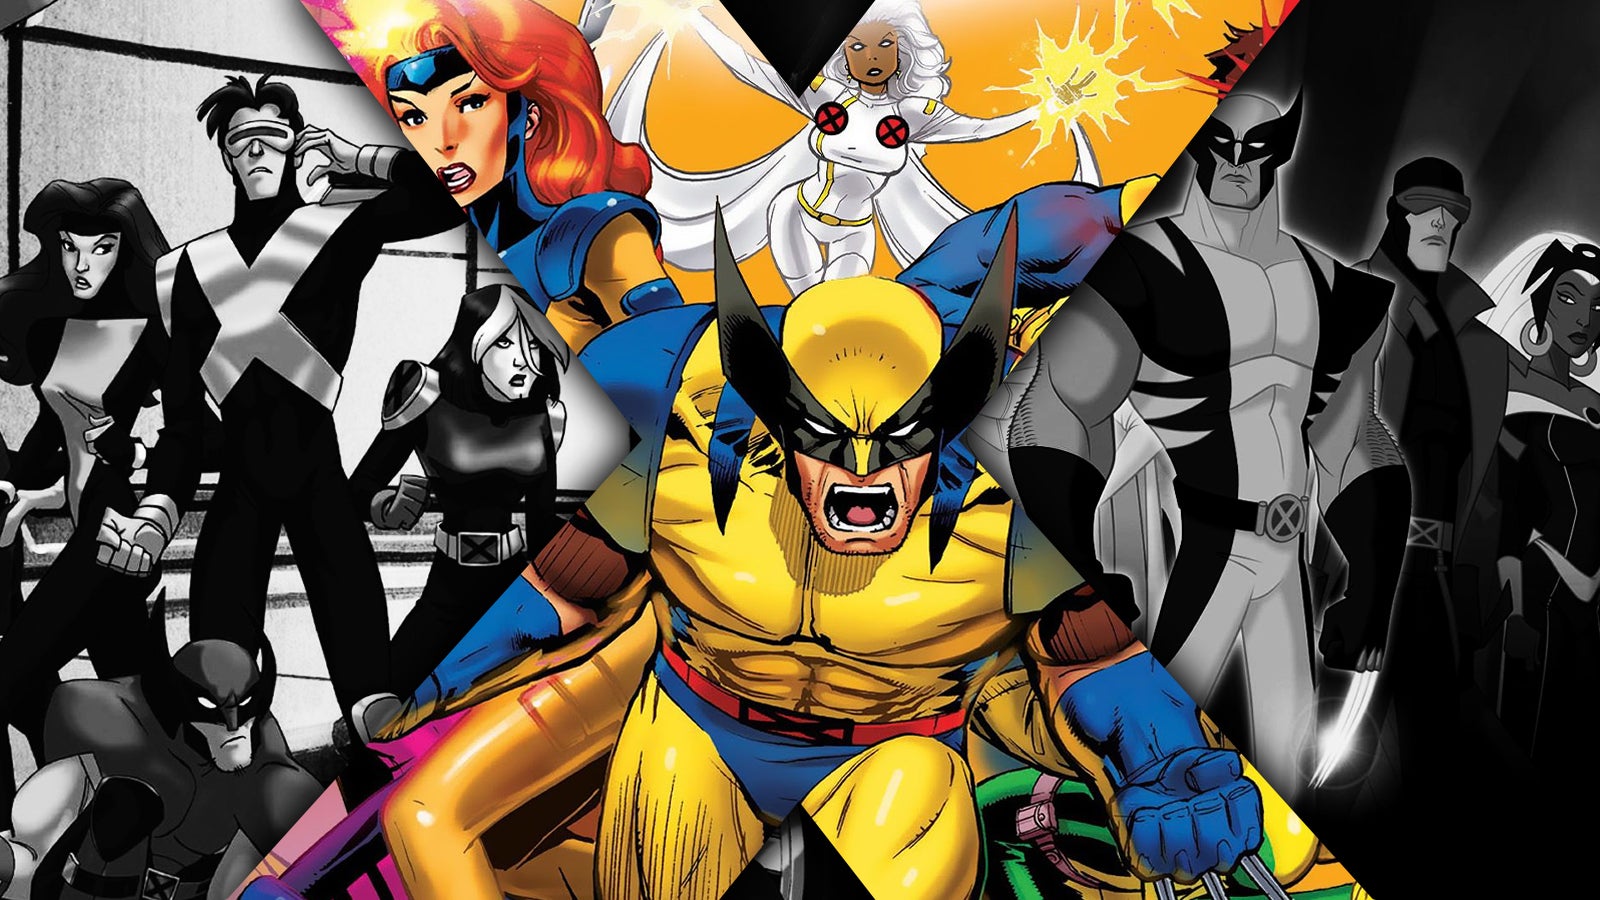 X-Men 97' Creator Fired From Disney+ Show Ahead of Series Debut